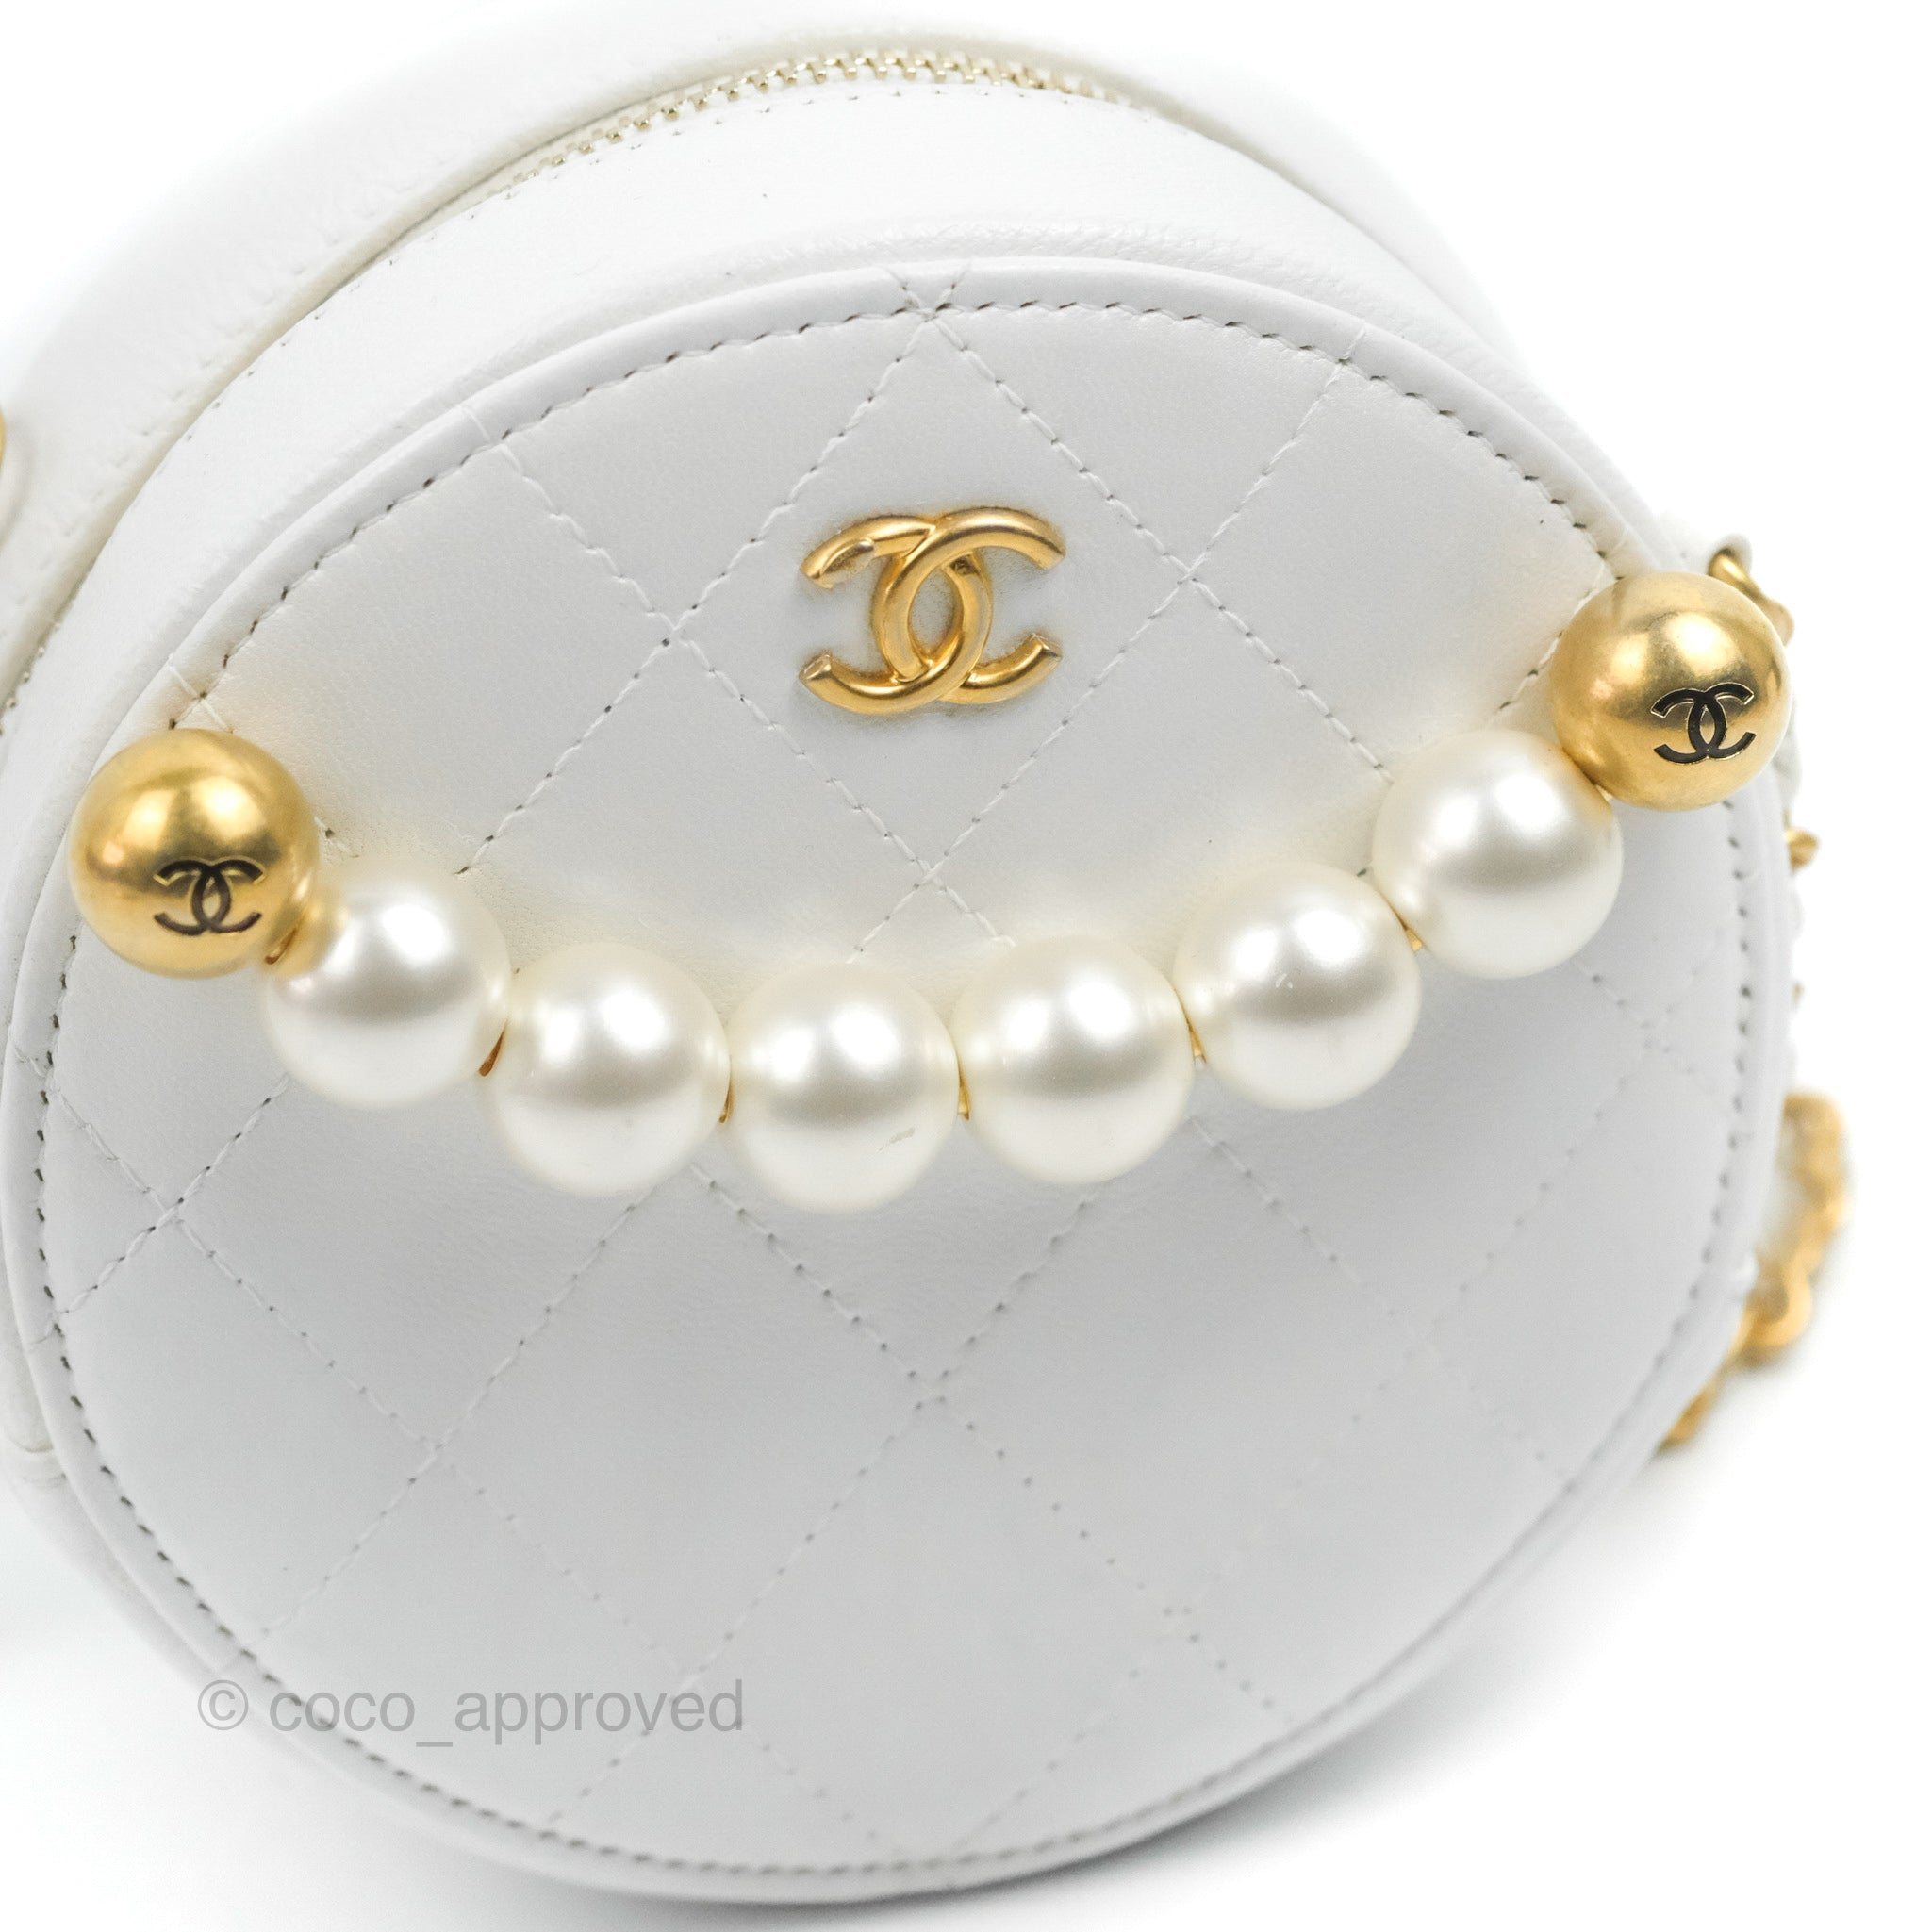 Chanel Pearl Round Clutch With Chain Calfskin Black GHW